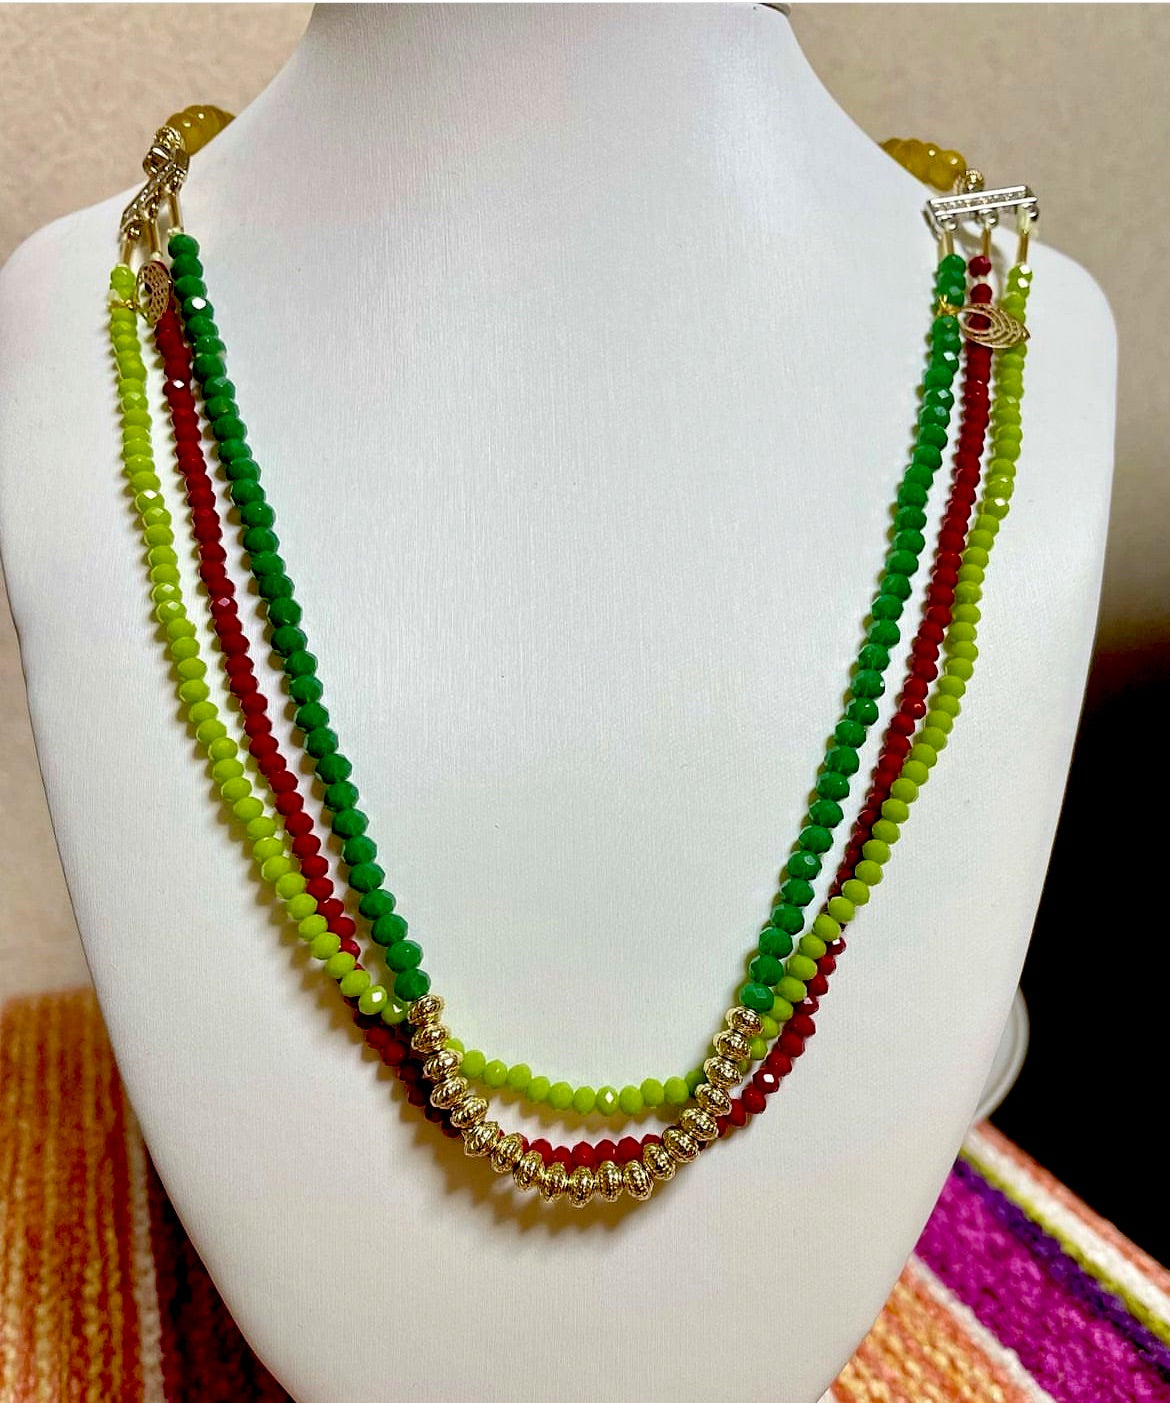 Handmade beads 3 colored layers necklace